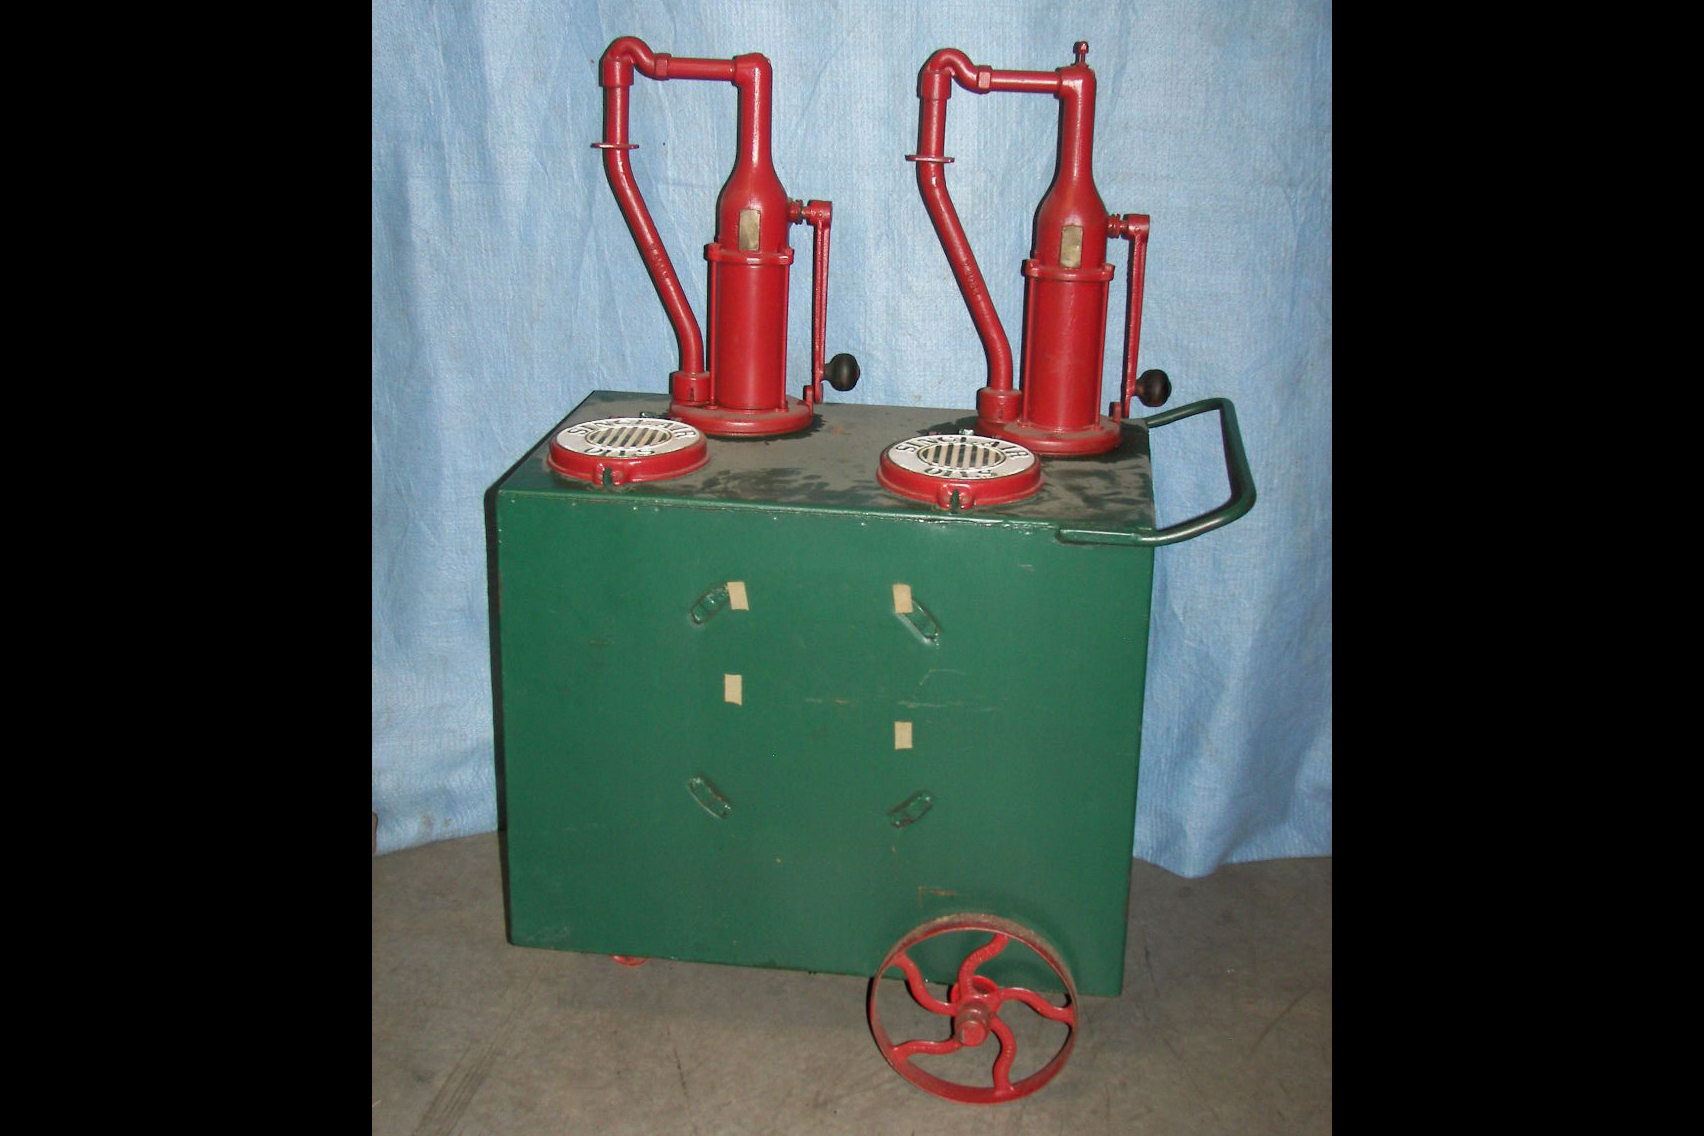 0th Image of a N/A SINCLAIR OIL PUMP CONTAINER ON WHEELS